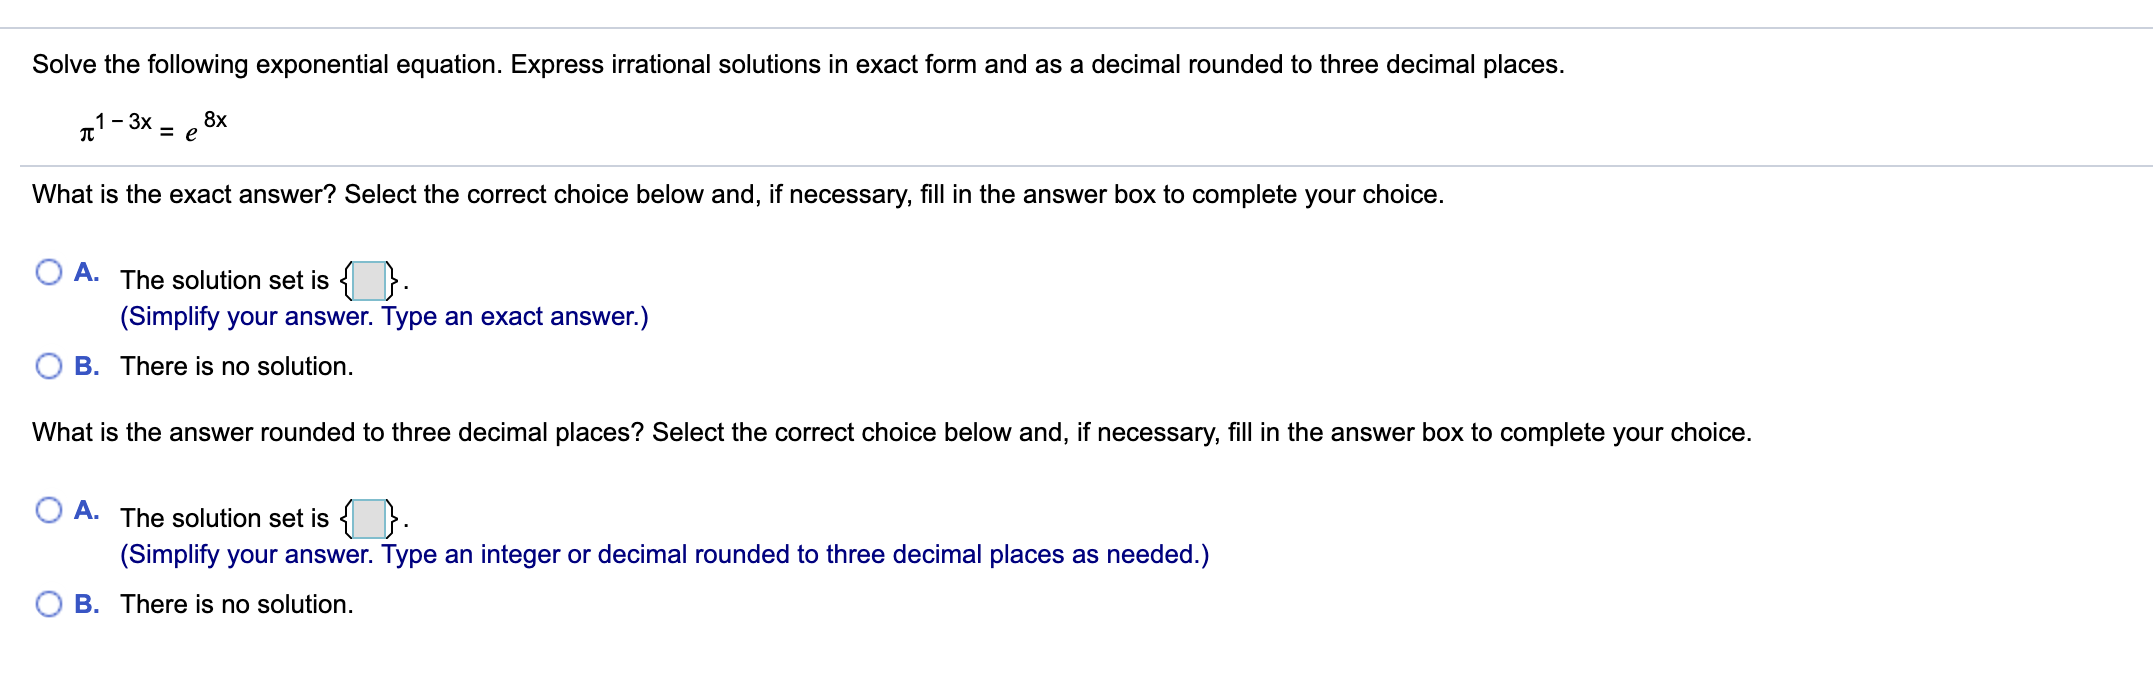 Solve the following exponential equation. Express irrational solutions in exact form and as a decimal rounded to three decimal places.
- 3x
8х
What is the exact answer? Select the correct choice below and, if necessary, fill in the answer box to complete your choice.
A. The solution set is { }.
(Simplify your answer. Type an exact answer.)
B. There is no solution.
What is the answer rounded to three decimal places? Select the correct choice below and, if necessary, fill in the answer box to complete your choice.
A.
The solution set is { }.
(Simplify your answer. Type an integer or decimal rounded to three decimal places as needed.)
B. There is no solution.
